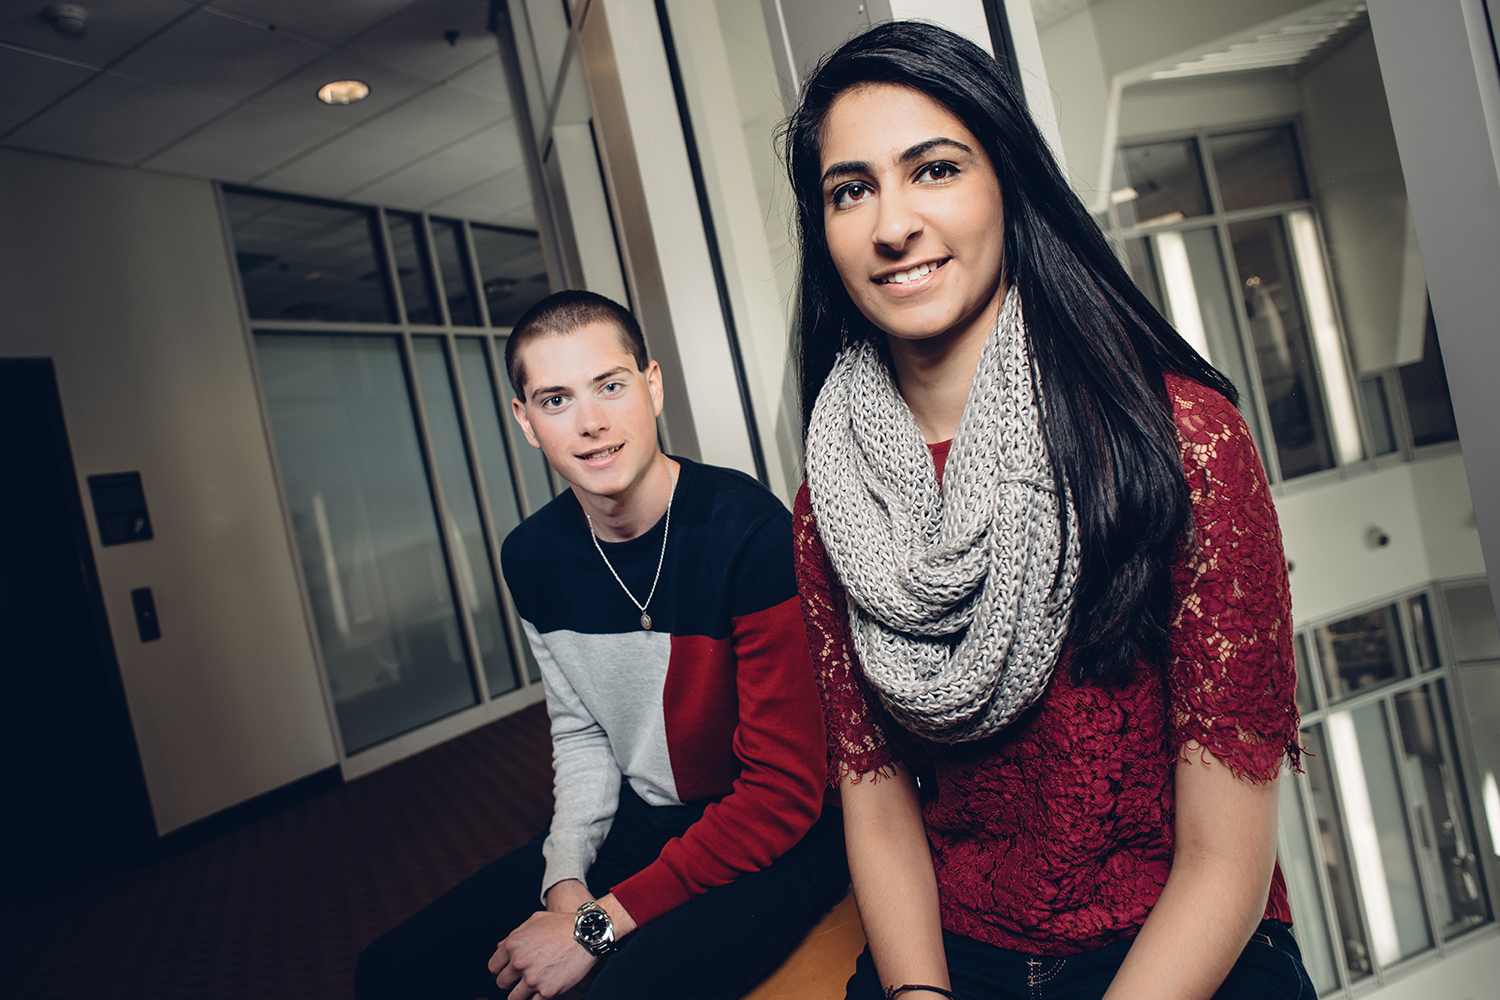 Jeffrey Noonan, left, and Kavisha Thakkar have been selected as two of UConn’s Leadership Legacy scholars, an honor bestowed on the University’s most exceptional students, who have demonstrated leadership, personal accomplishment and academic excellence. (Nathan Oldham/UConn photo)